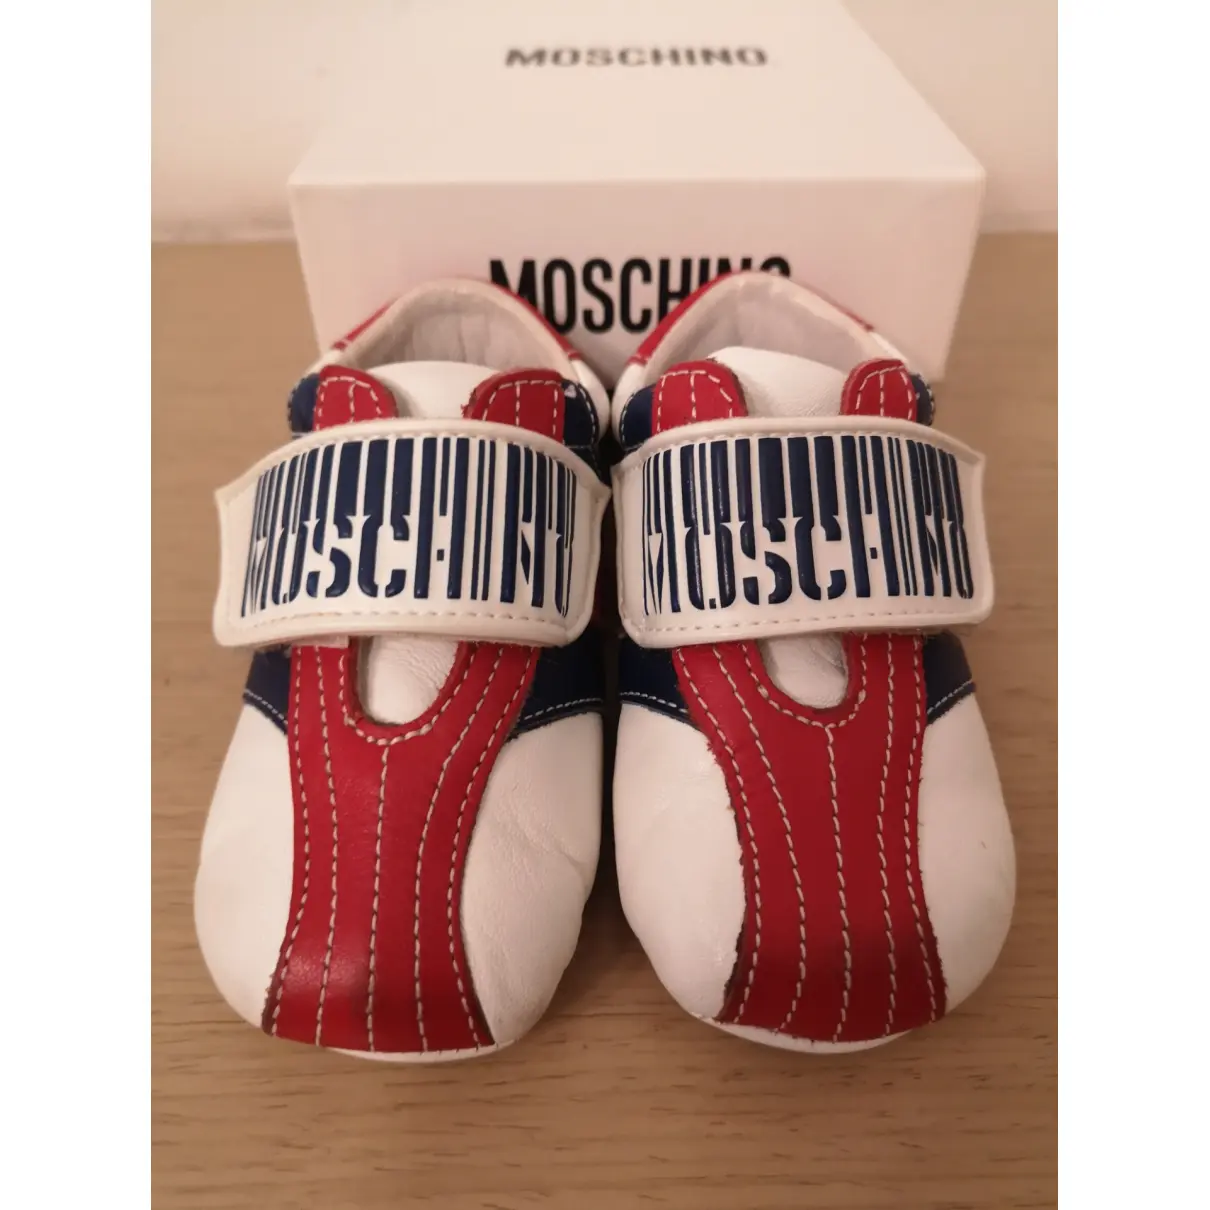 Buy Moschino Love Leather first shoes online